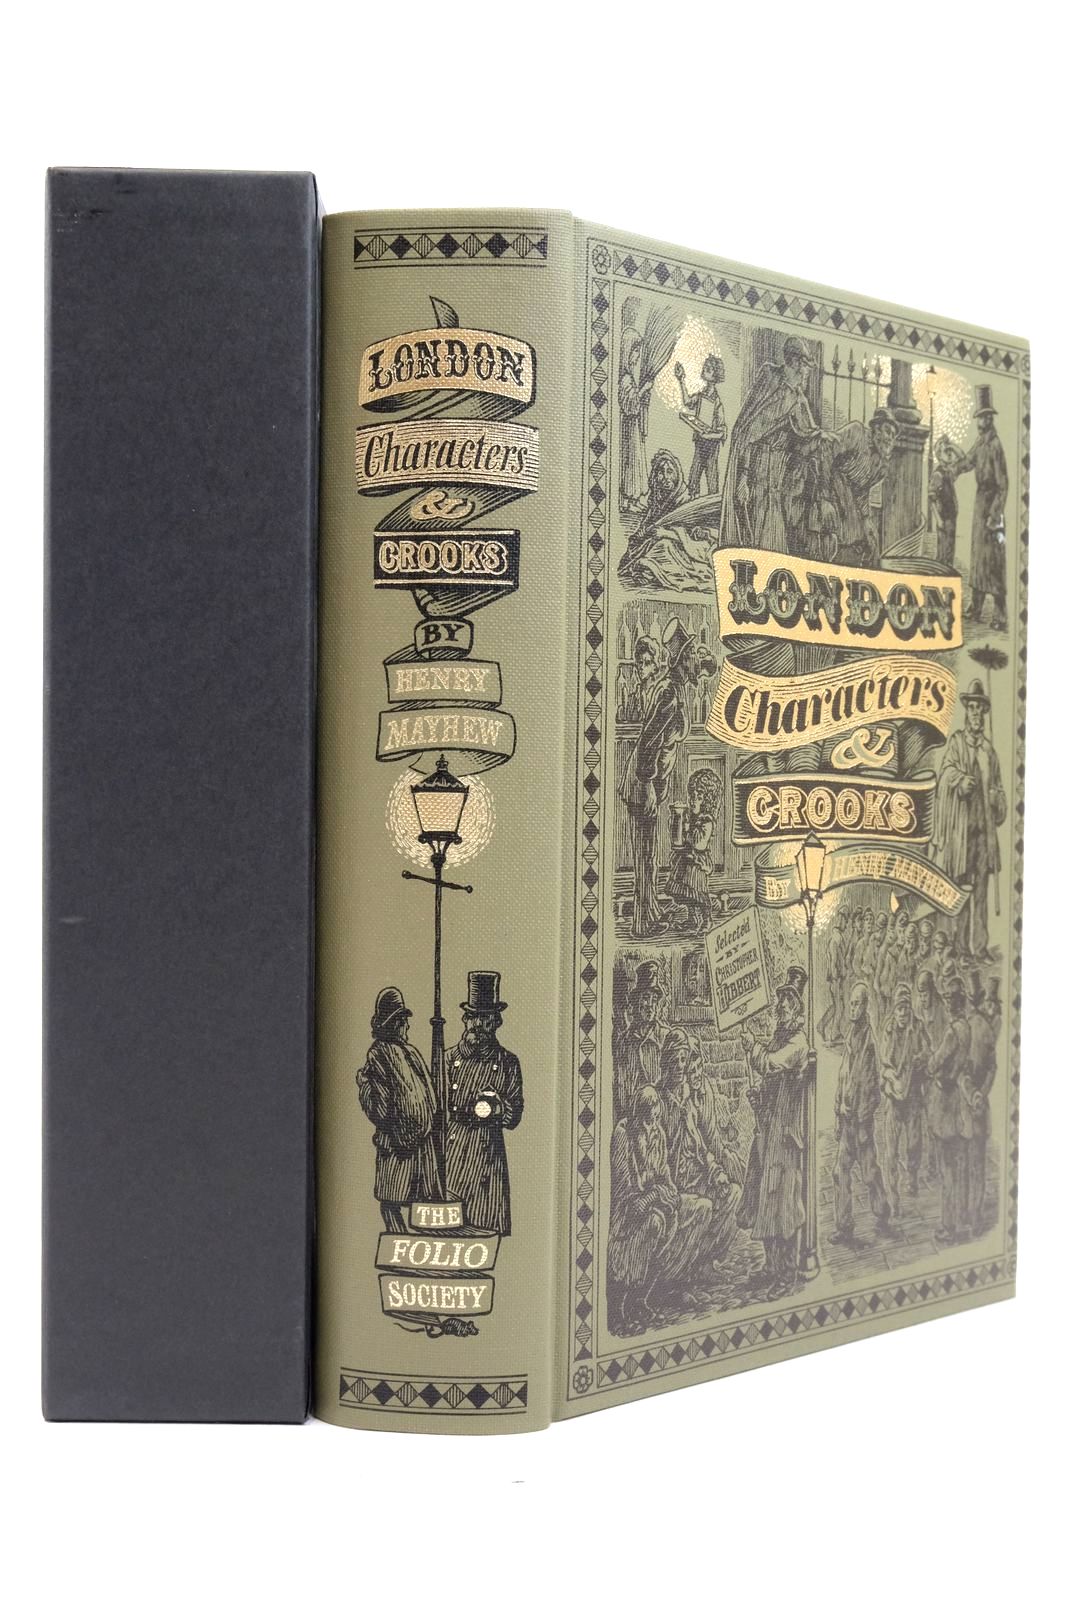 Photo of LONDON CHARACTERS AND CROOKS written by Mayhew, Henry
Hibbert, Christopher published by Folio Society (STOCK CODE: 2138177)  for sale by Stella & Rose's Books